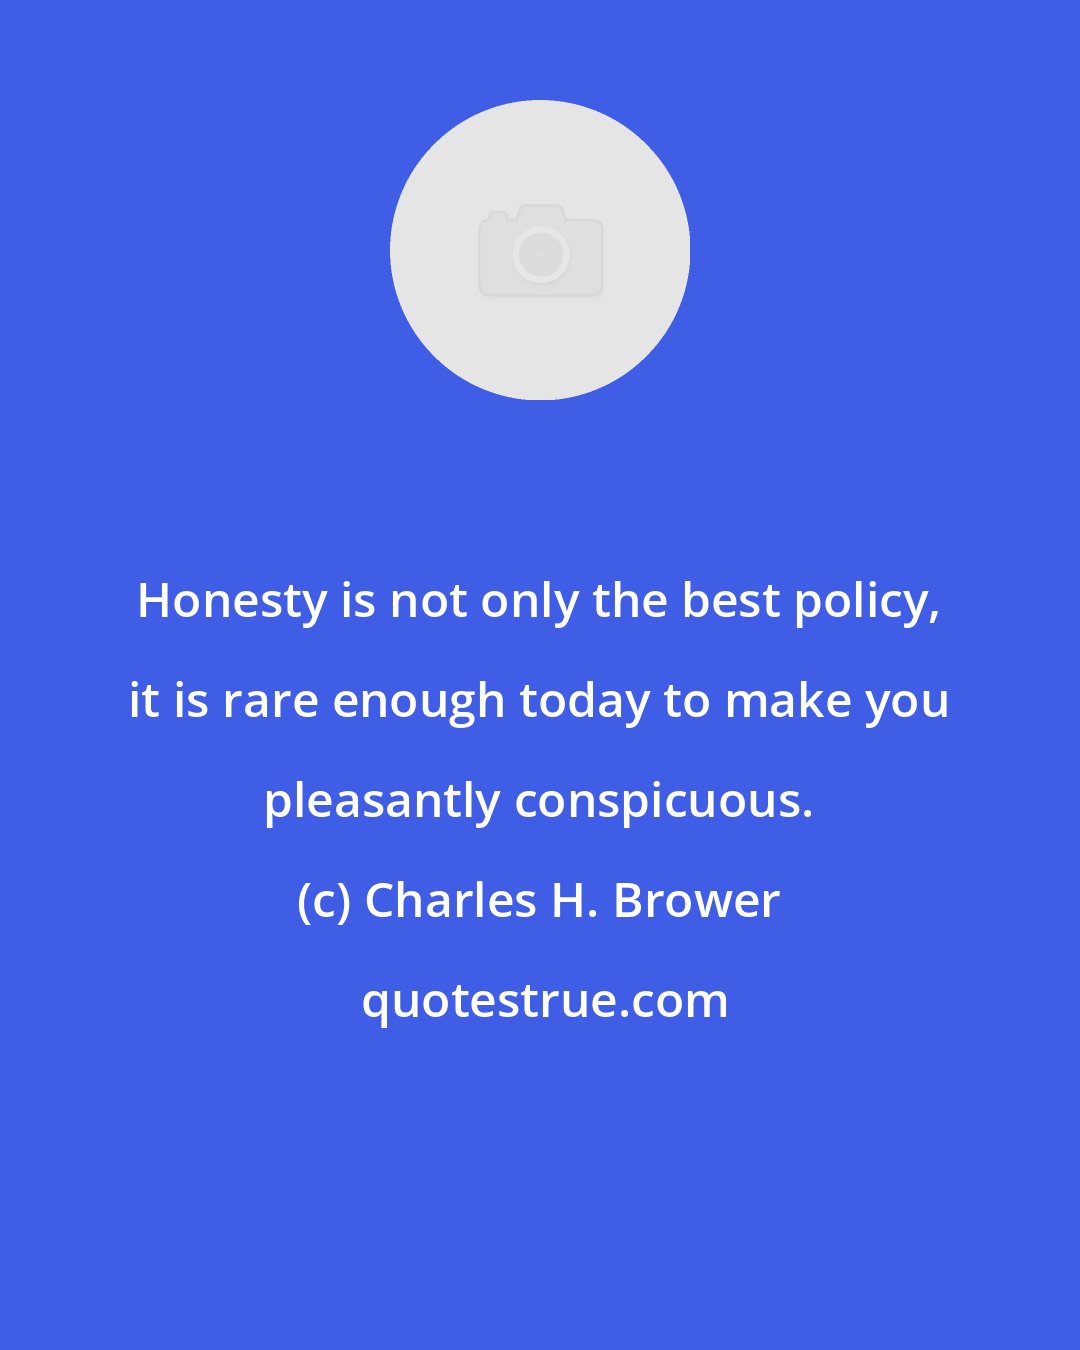 Charles H. Brower: Honesty is not only the best policy, it is rare enough today to make you pleasantly conspicuous.